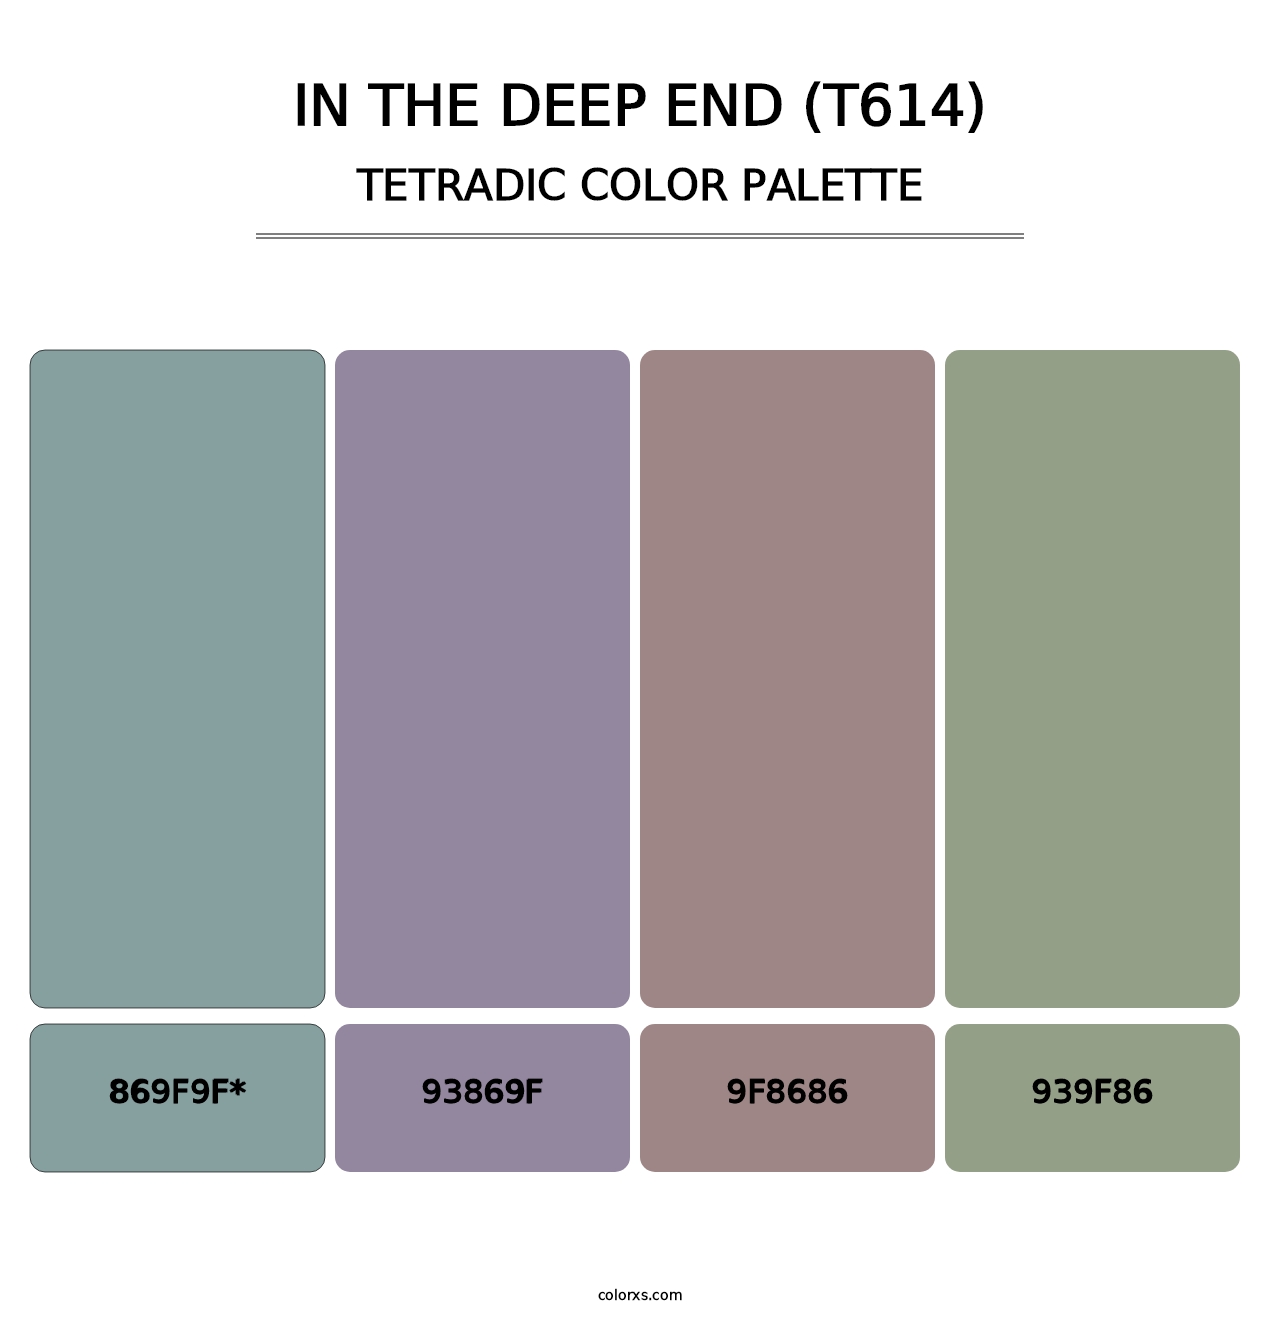 In the Deep End (T614) - Tetradic Color Palette